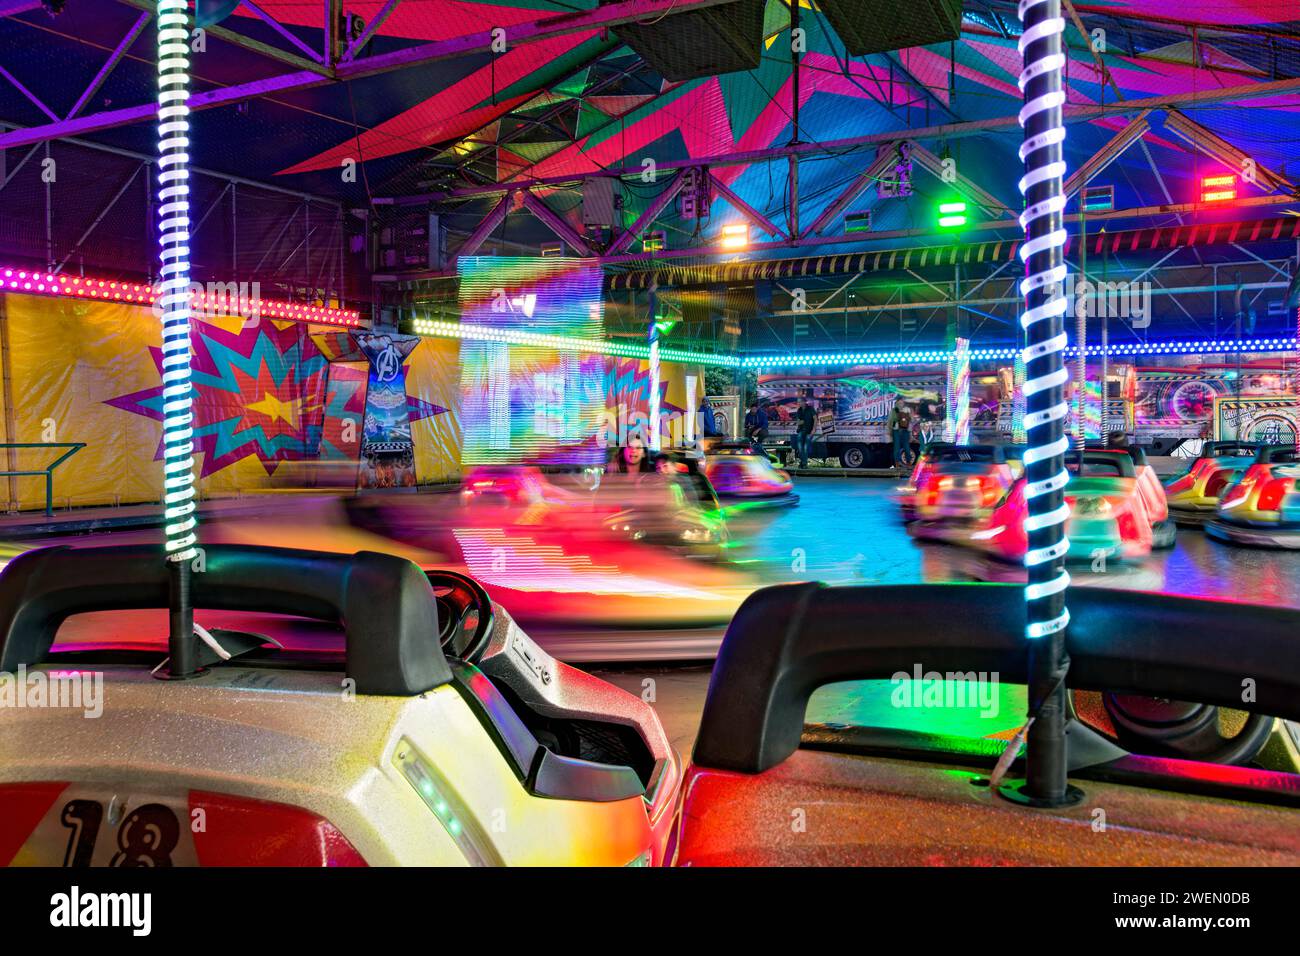 Autoscooter speedway, autodrome, bumper cars, electric cars with colourful lighting, fairground ride at Kalter Markt, Kaale Maeaert, funfair Stock Photo